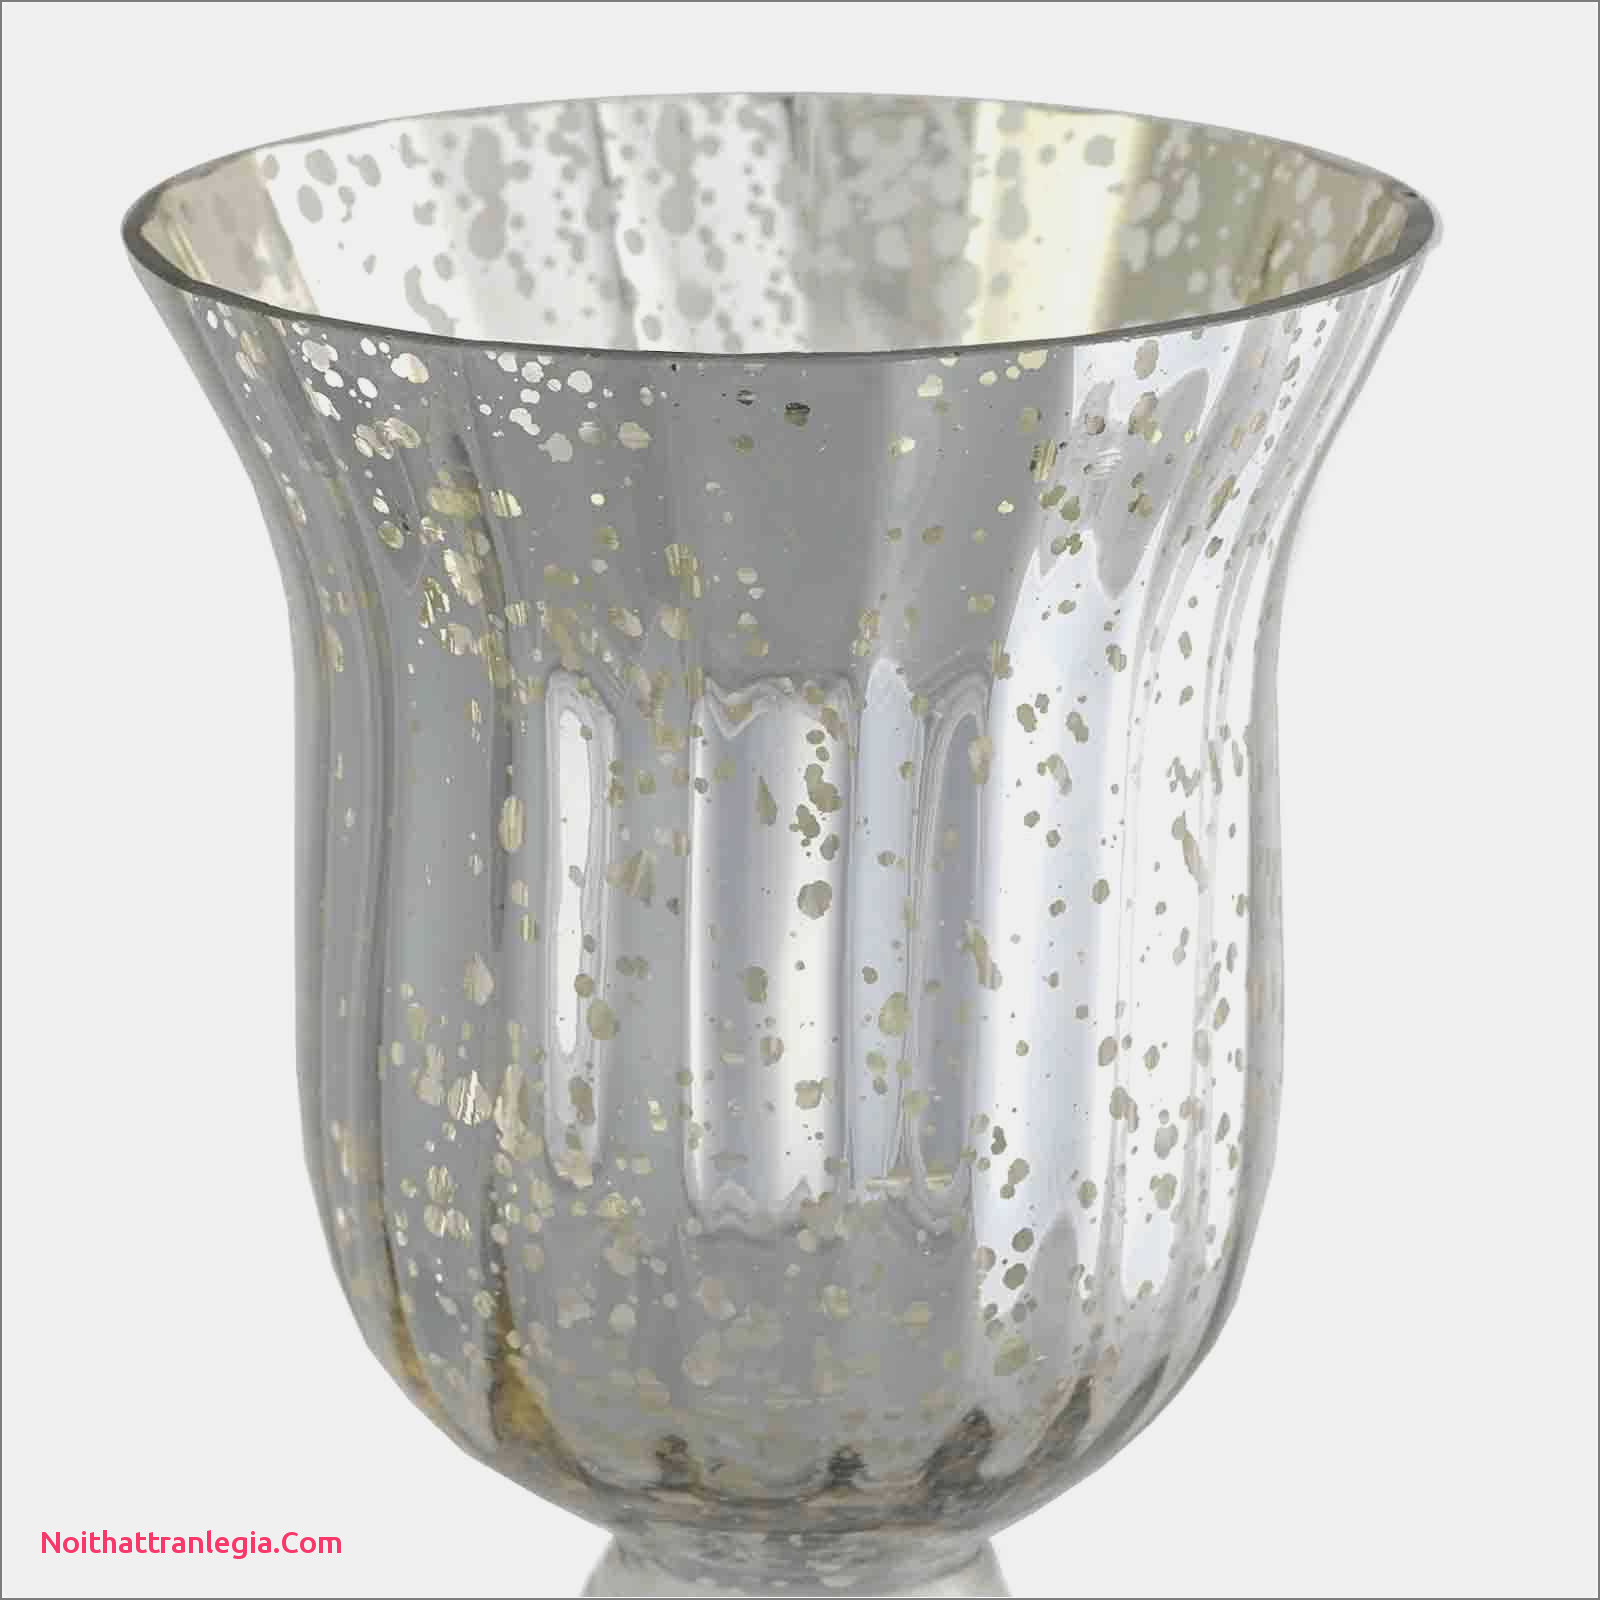 24 Perfect Clear Acrylic Square Vases 2024 free download clear acrylic square vases of 20 wedding vases noithattranlegia vases design within wedding guest gift ideas inspirational candles for wedding favors superb pe s5h vases candle vase i